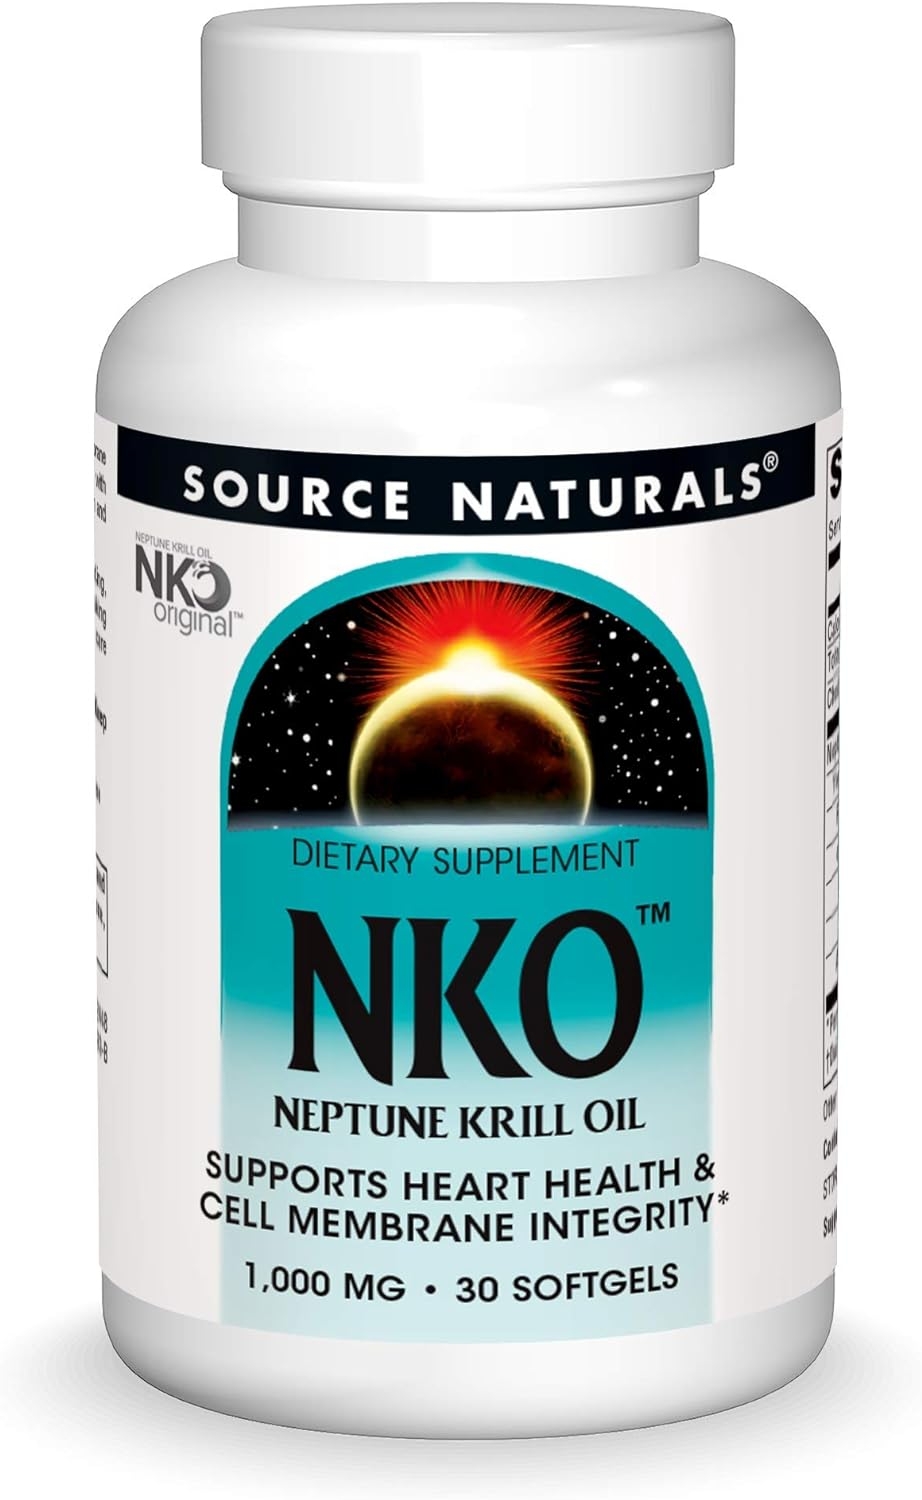 Source Naturals NKO Neptune Krill Oil, Supports Heart Health & Cell Membrane Integrity - 30 Softgels